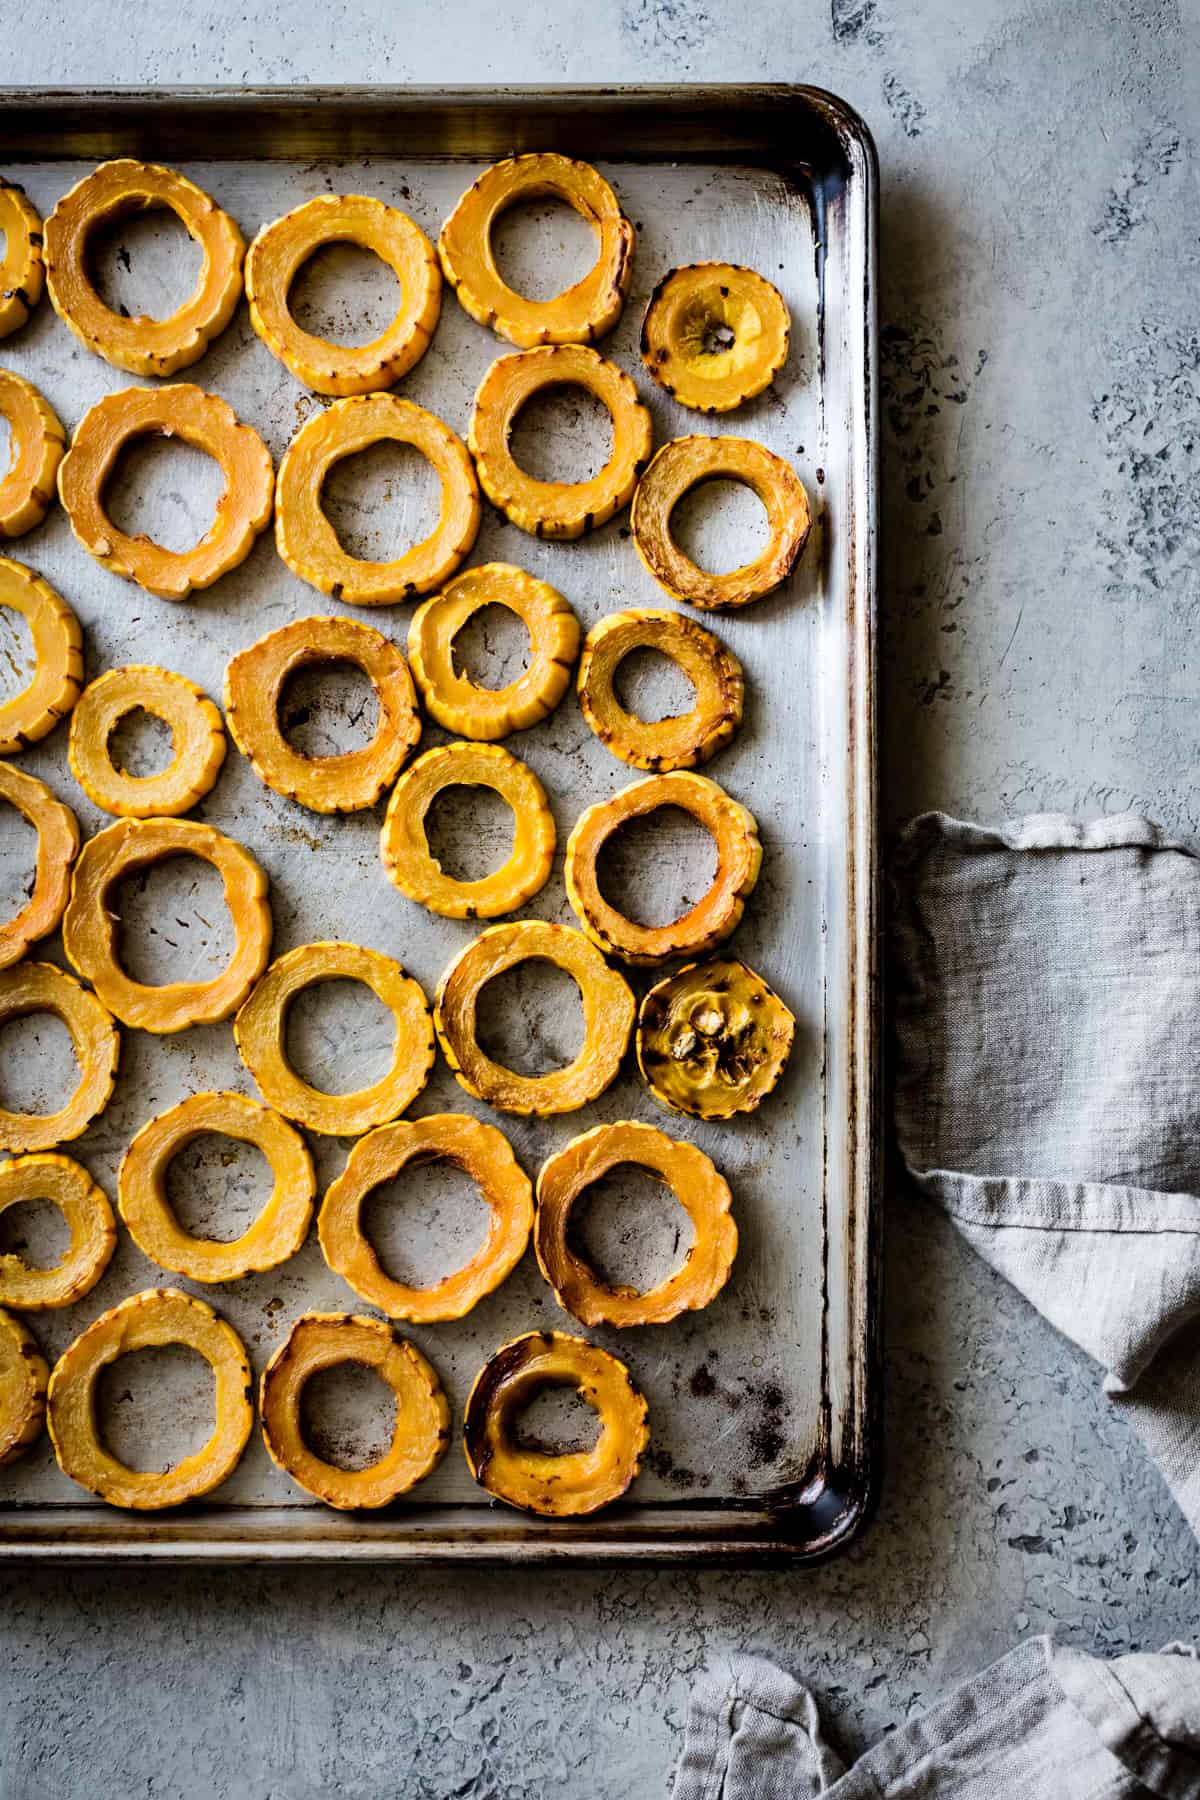 Roasted Delicata Squash with Miso Butter on oven tray 